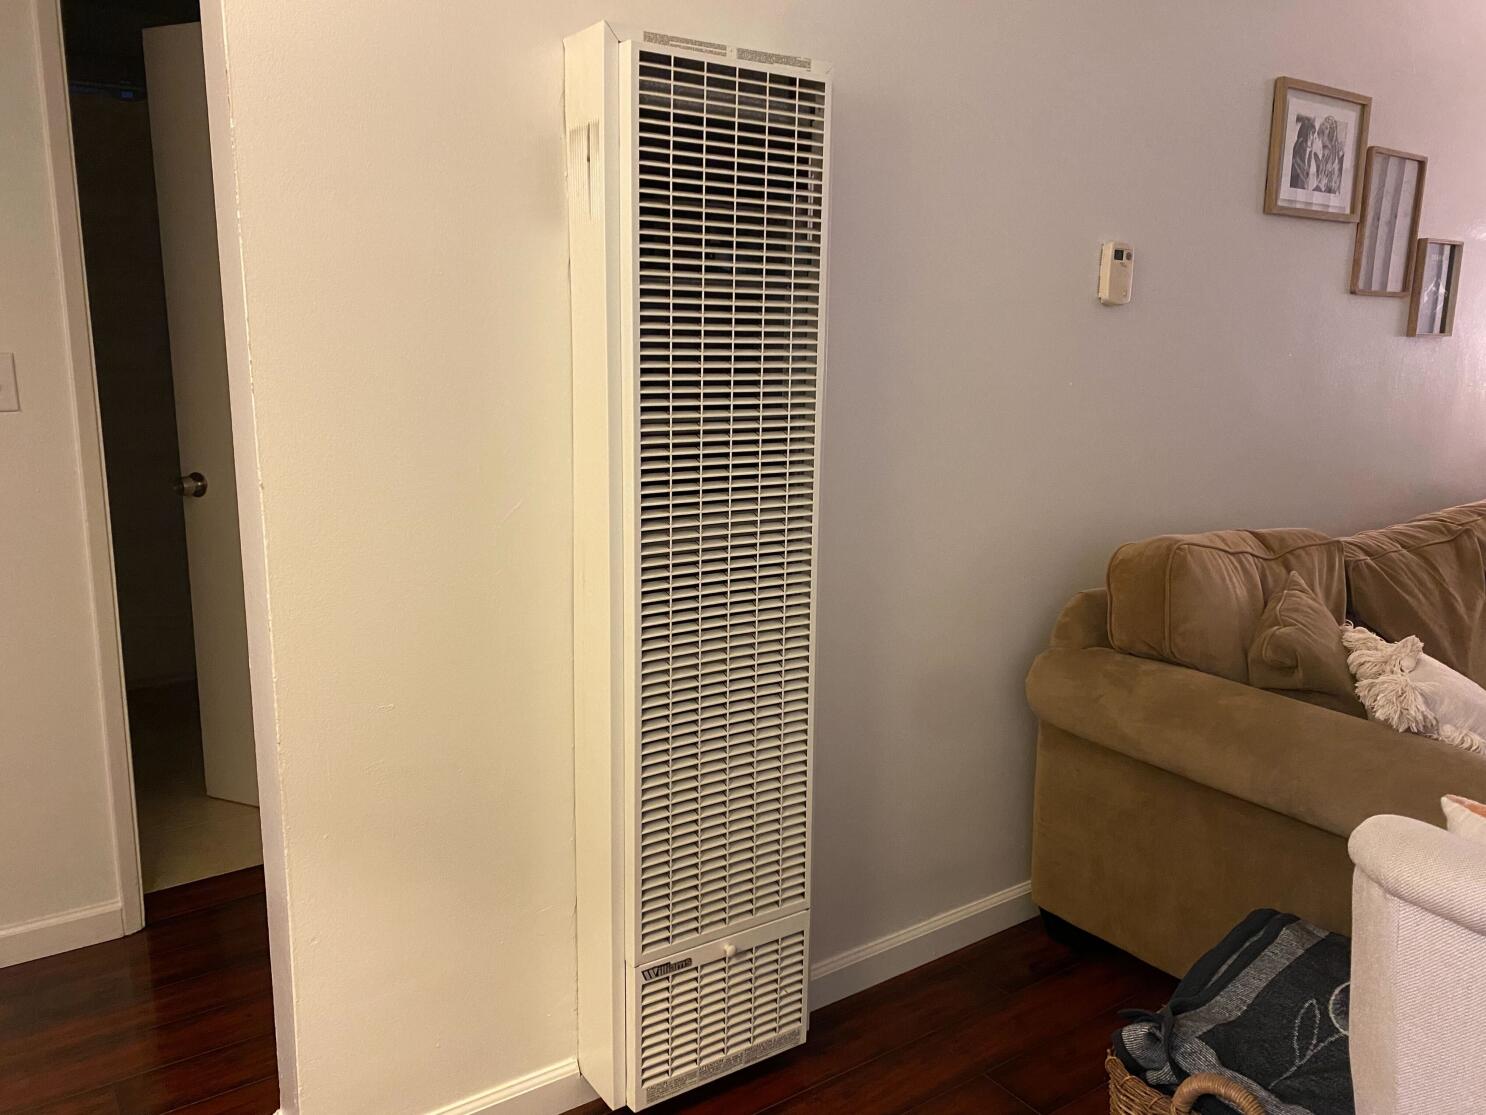 How to safely restart your wall heater — and get help if needed - Los  Angeles Times